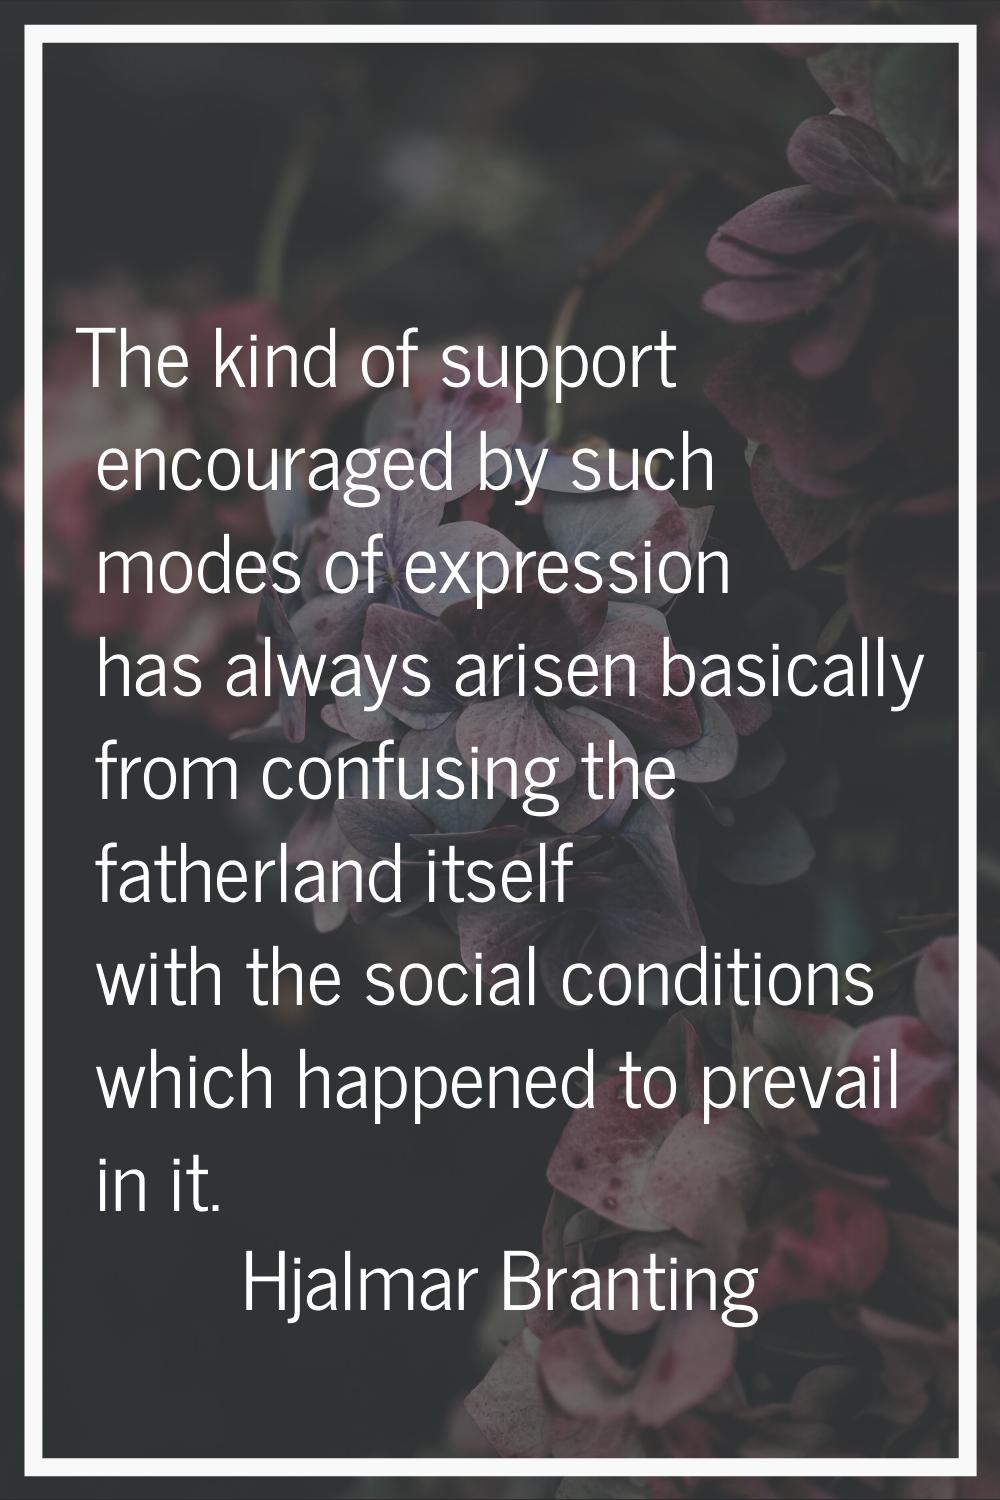 The kind of support encouraged by such modes of expression has always arisen basically from confusi